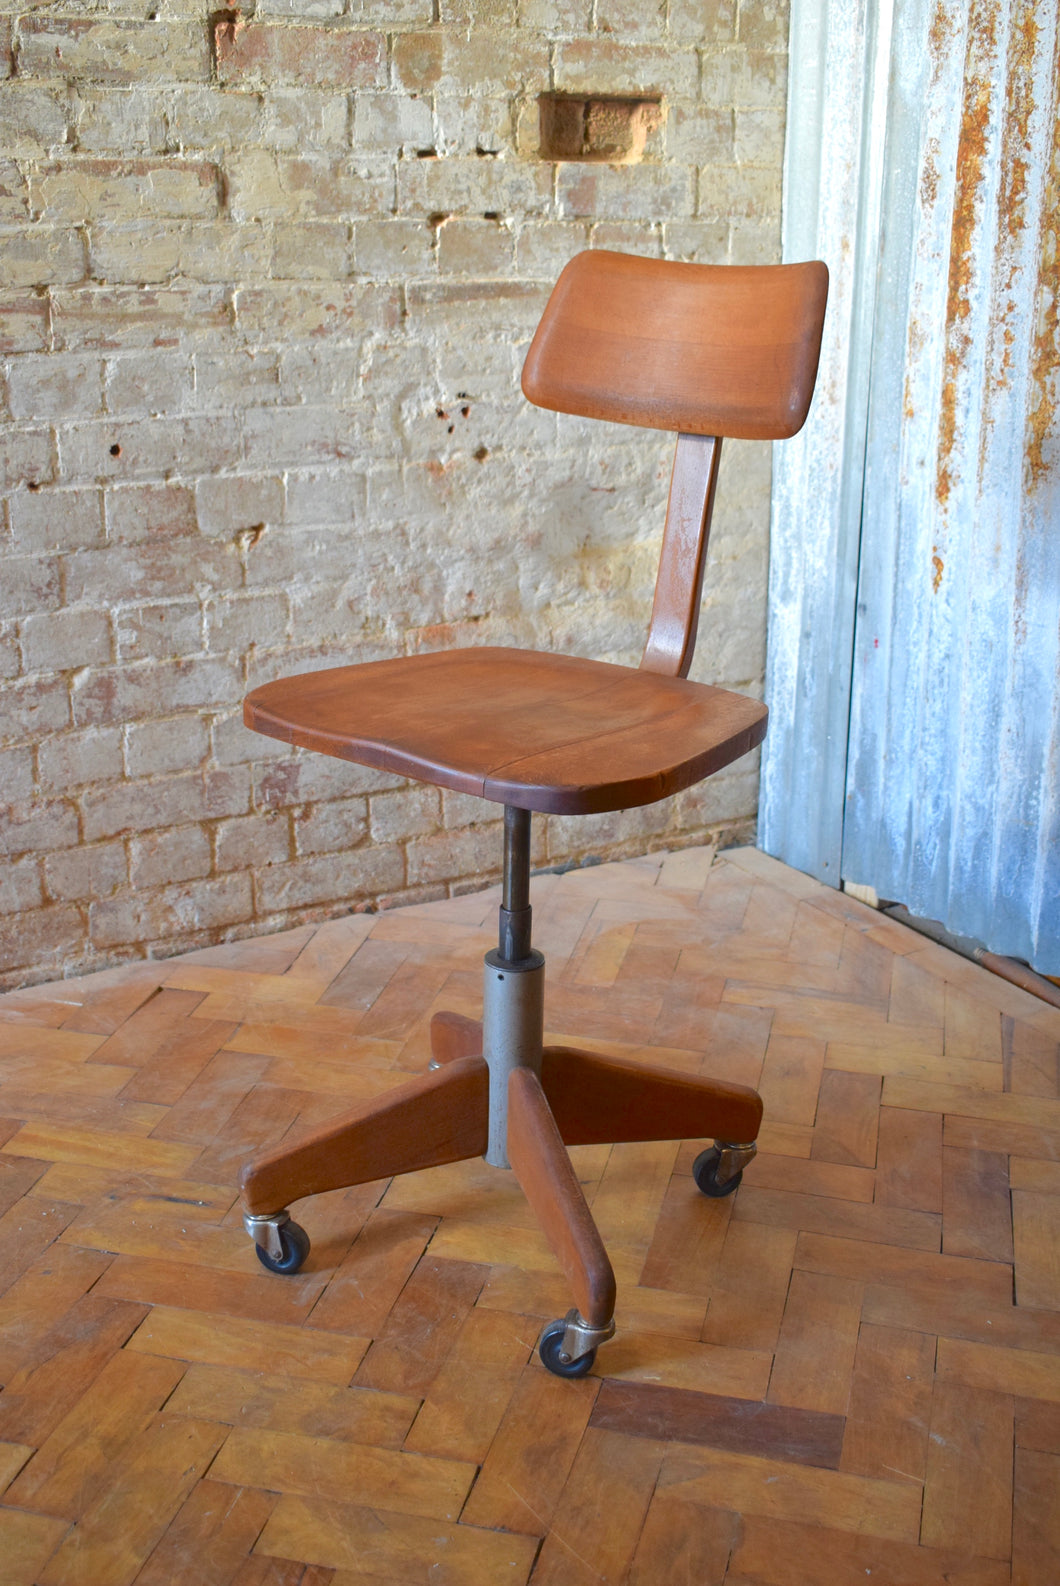 Swiss 1950s Vintage Industrial Office Chair By Stoll Giroflex